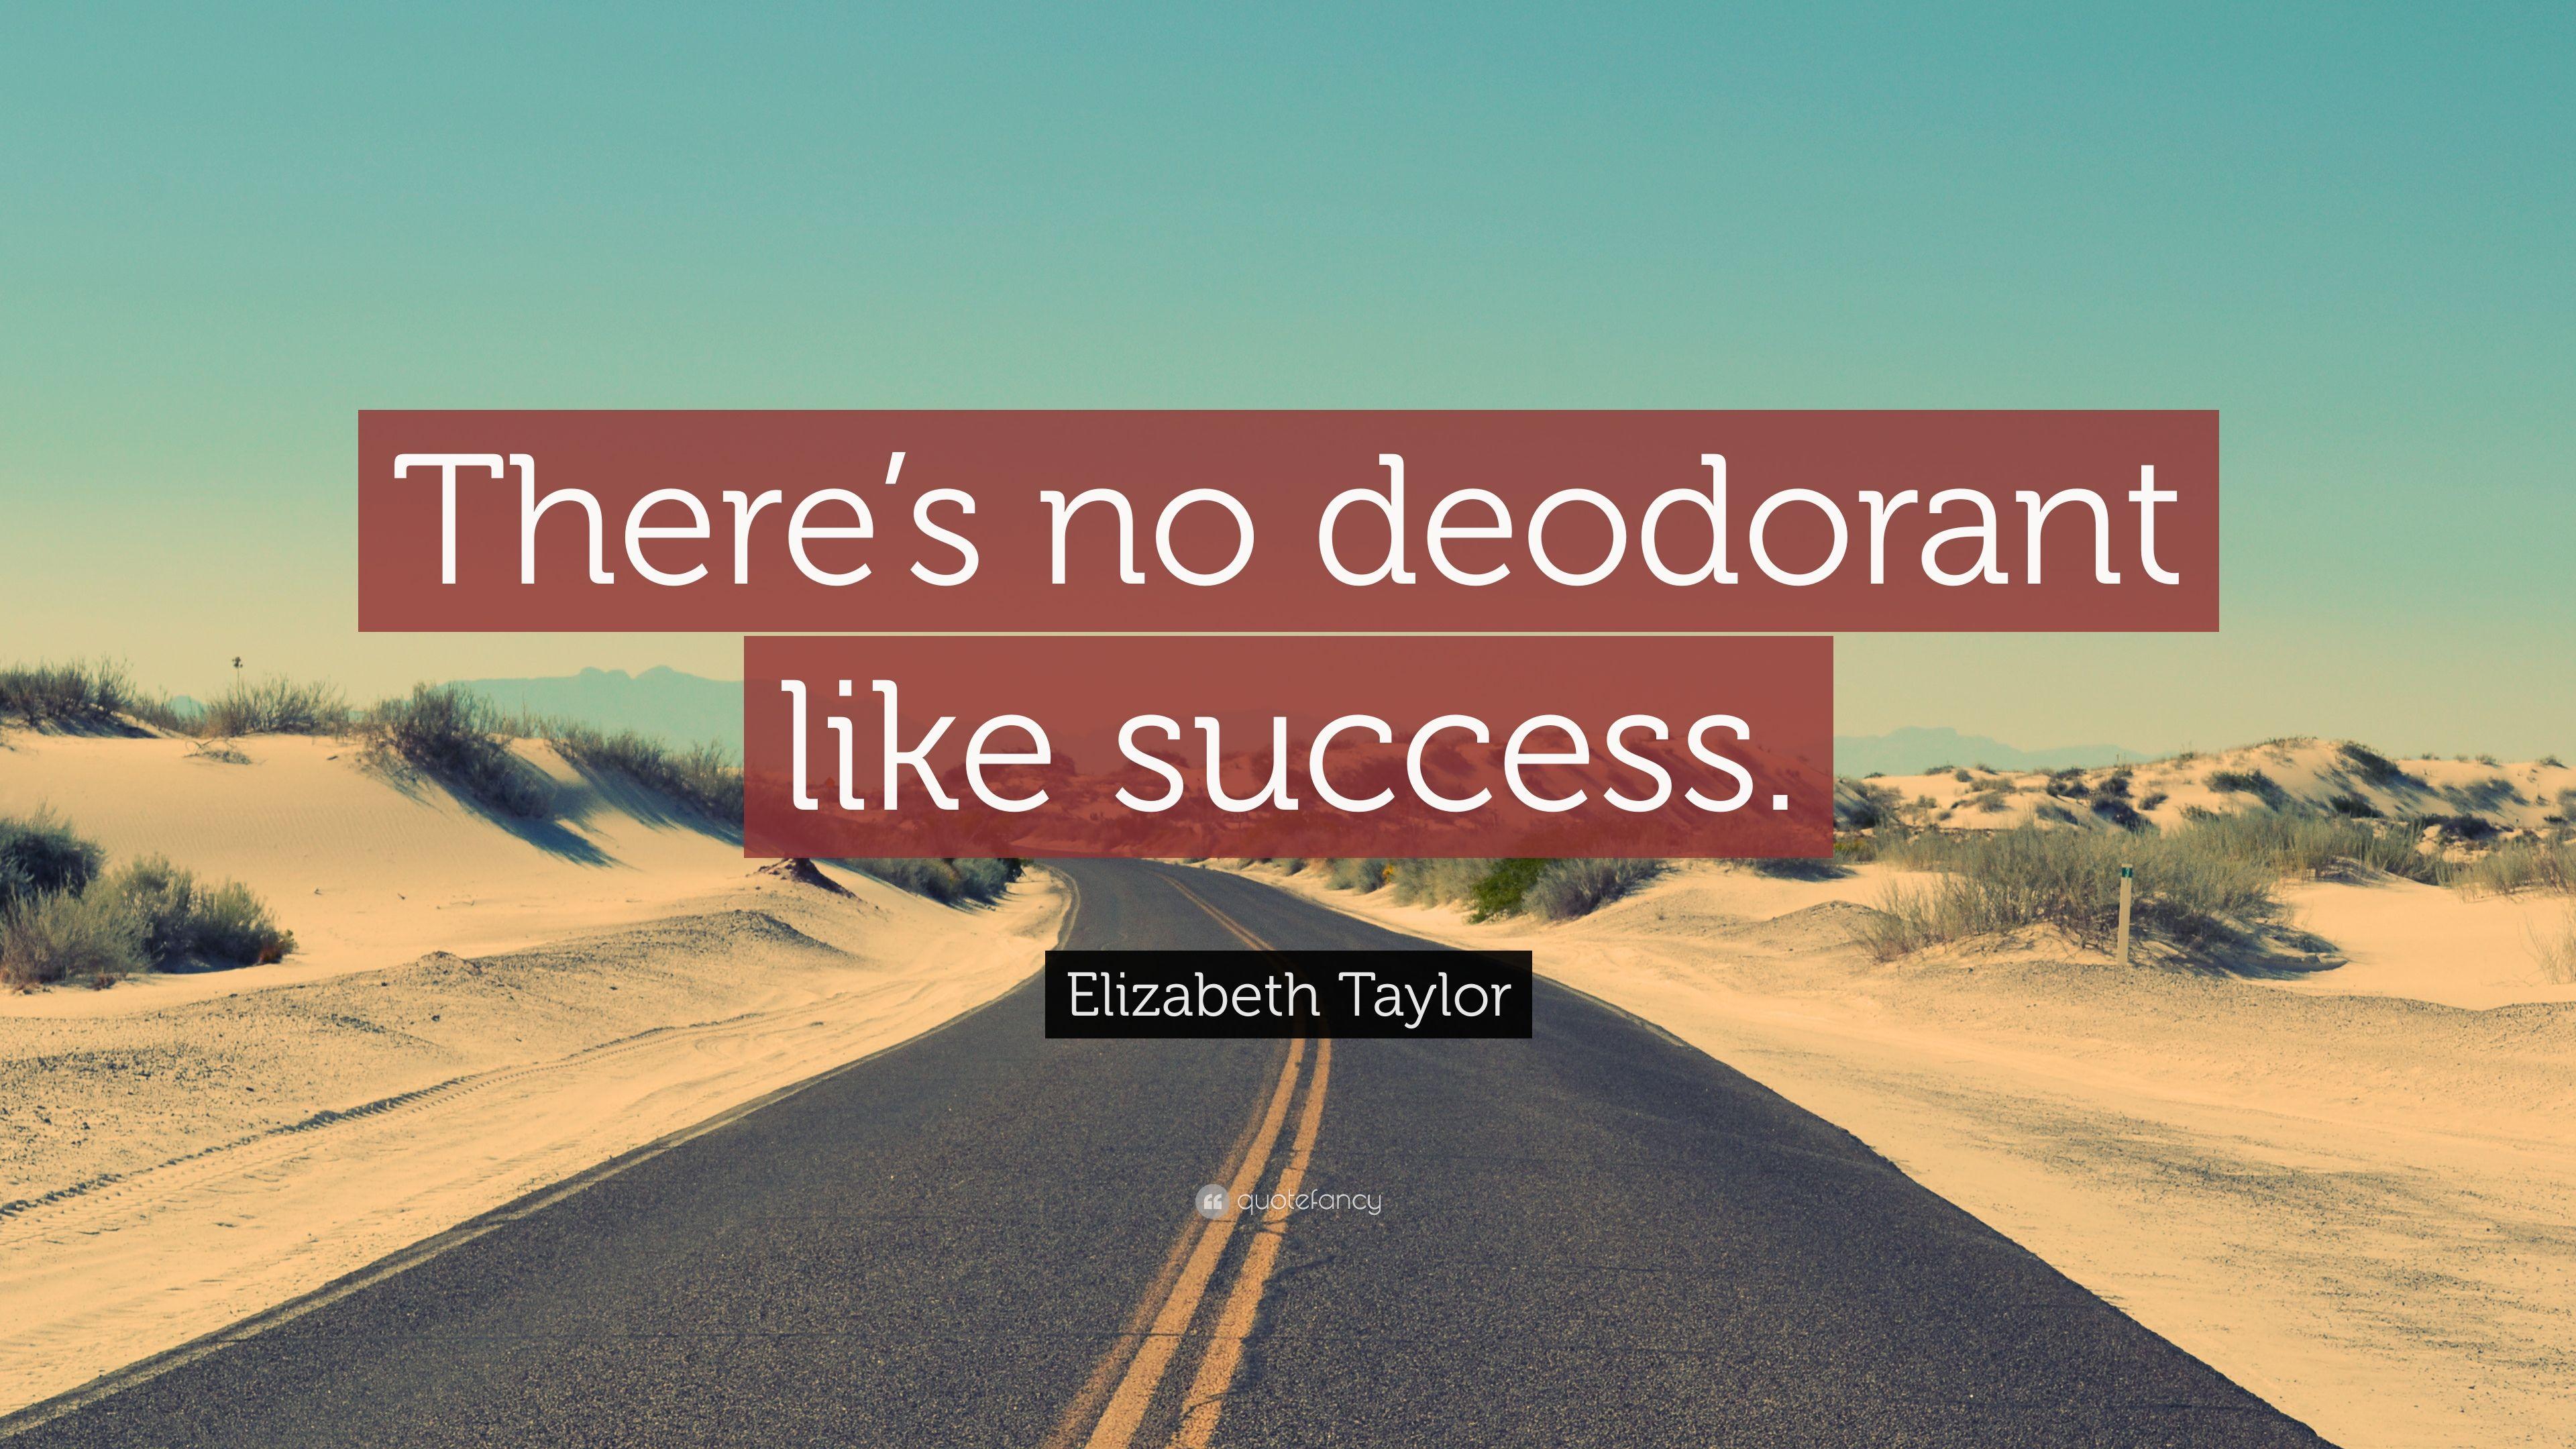 Elizabeth Taylor Quote: “There's no deodorant like success.” 7